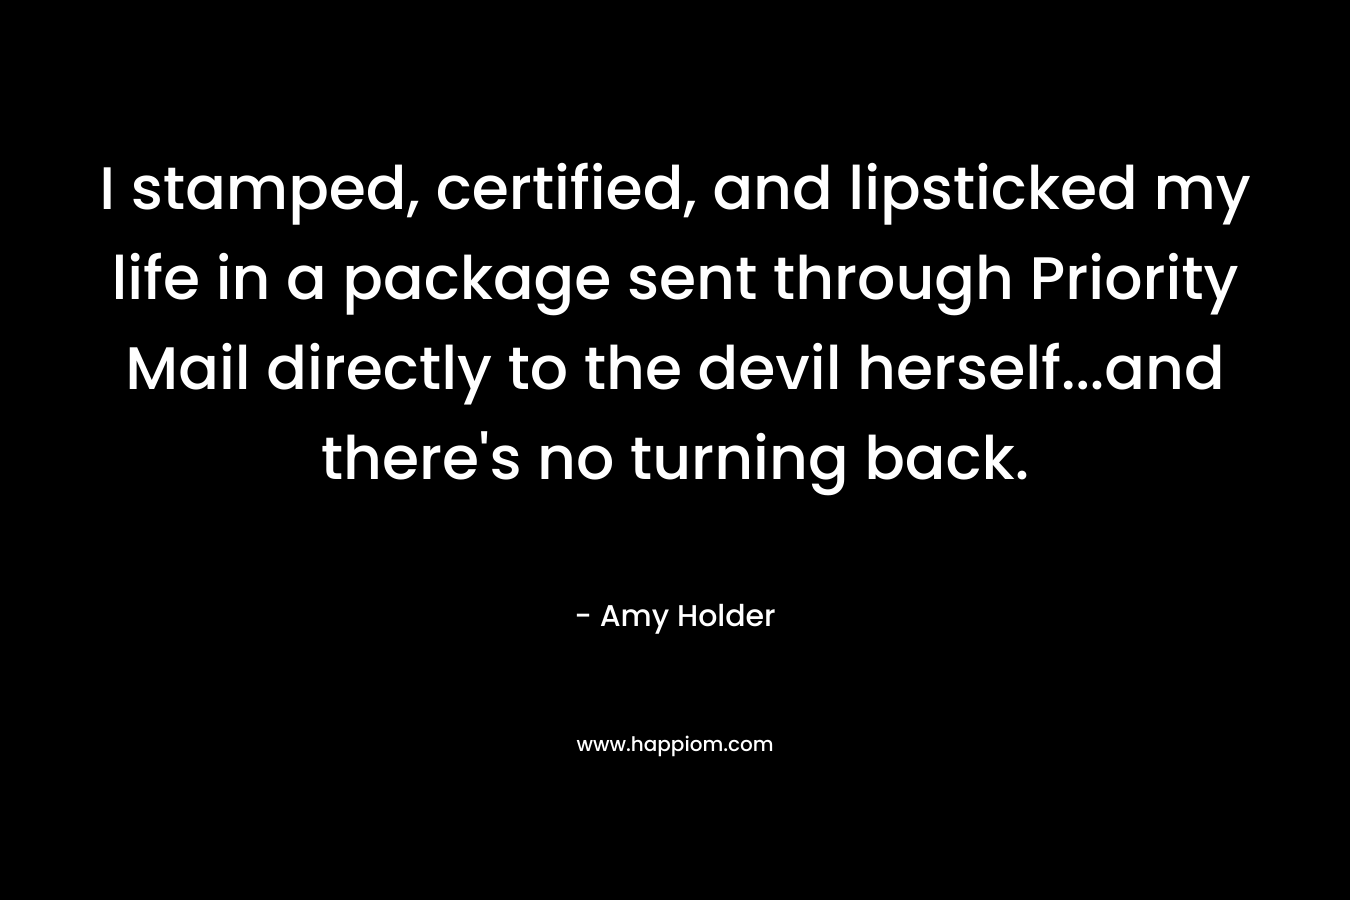 I stamped, certified, and lipsticked my life in a package sent through Priority Mail directly to the devil herself…and there’s no turning back. – Amy Holder